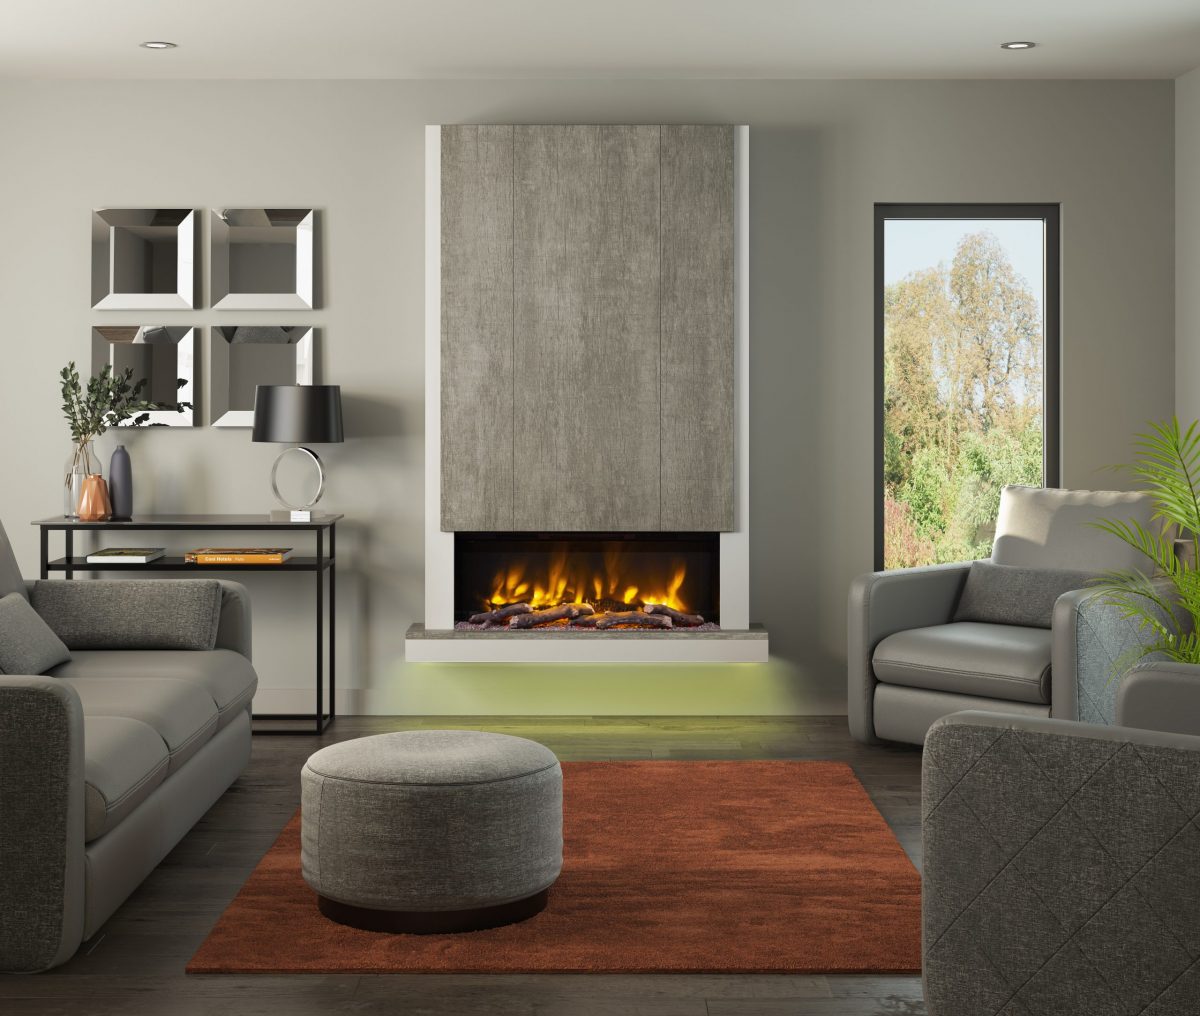 Elgin & Hall Pryzm 5D Electric Fire Camino 53″ Wall Mounted Timber Suite with Mood Lights in Ash White & Vintage Oak Grey